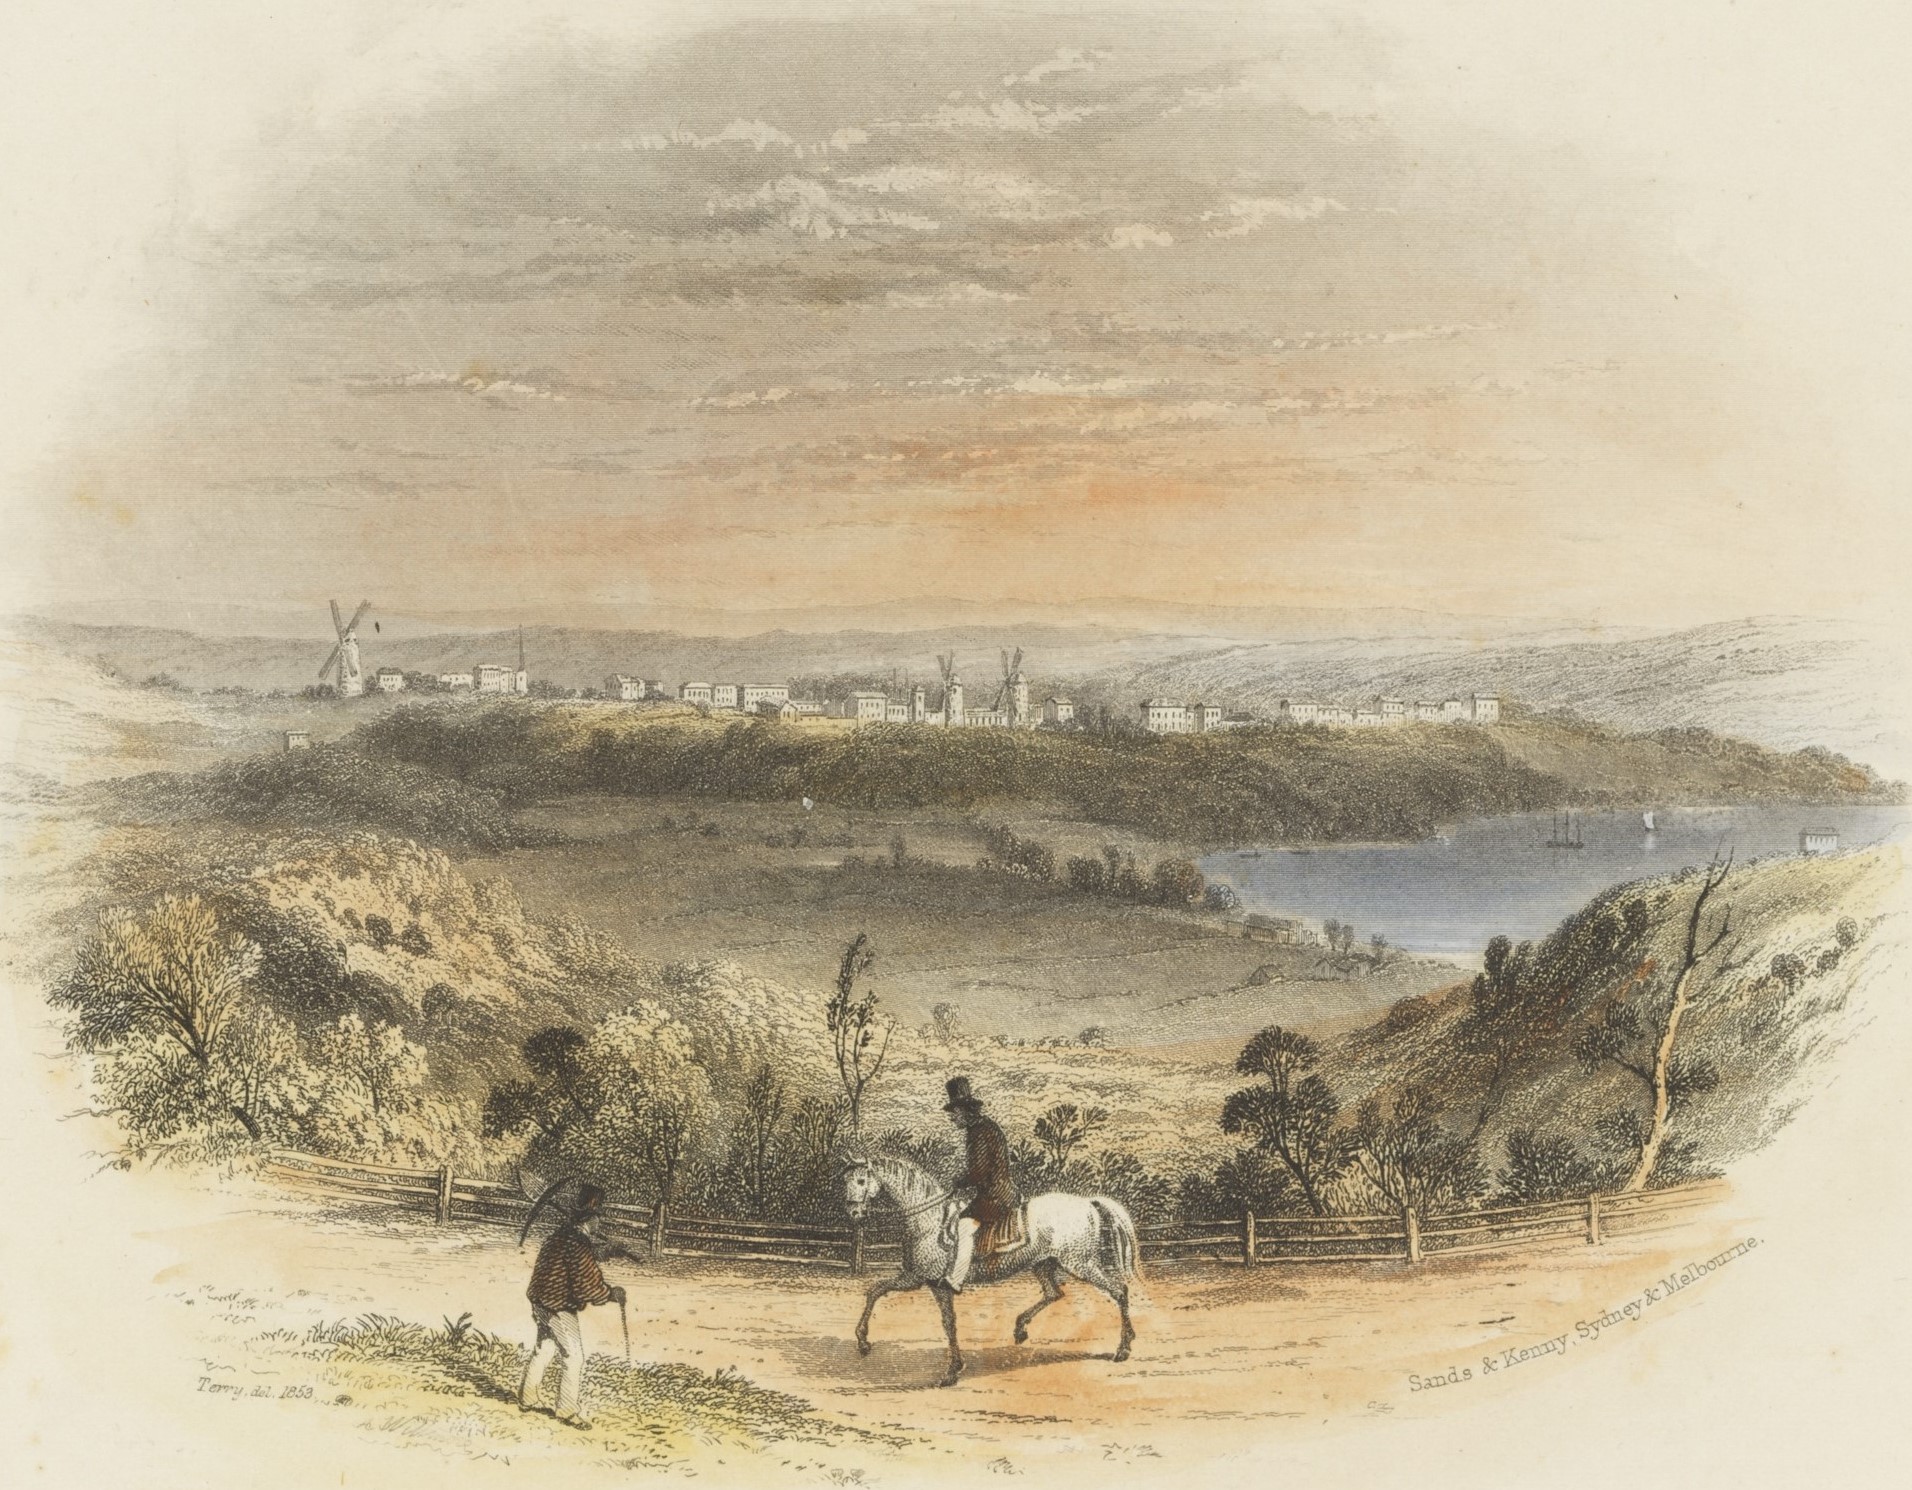 Illustration of Sydney from the eastern suburbs